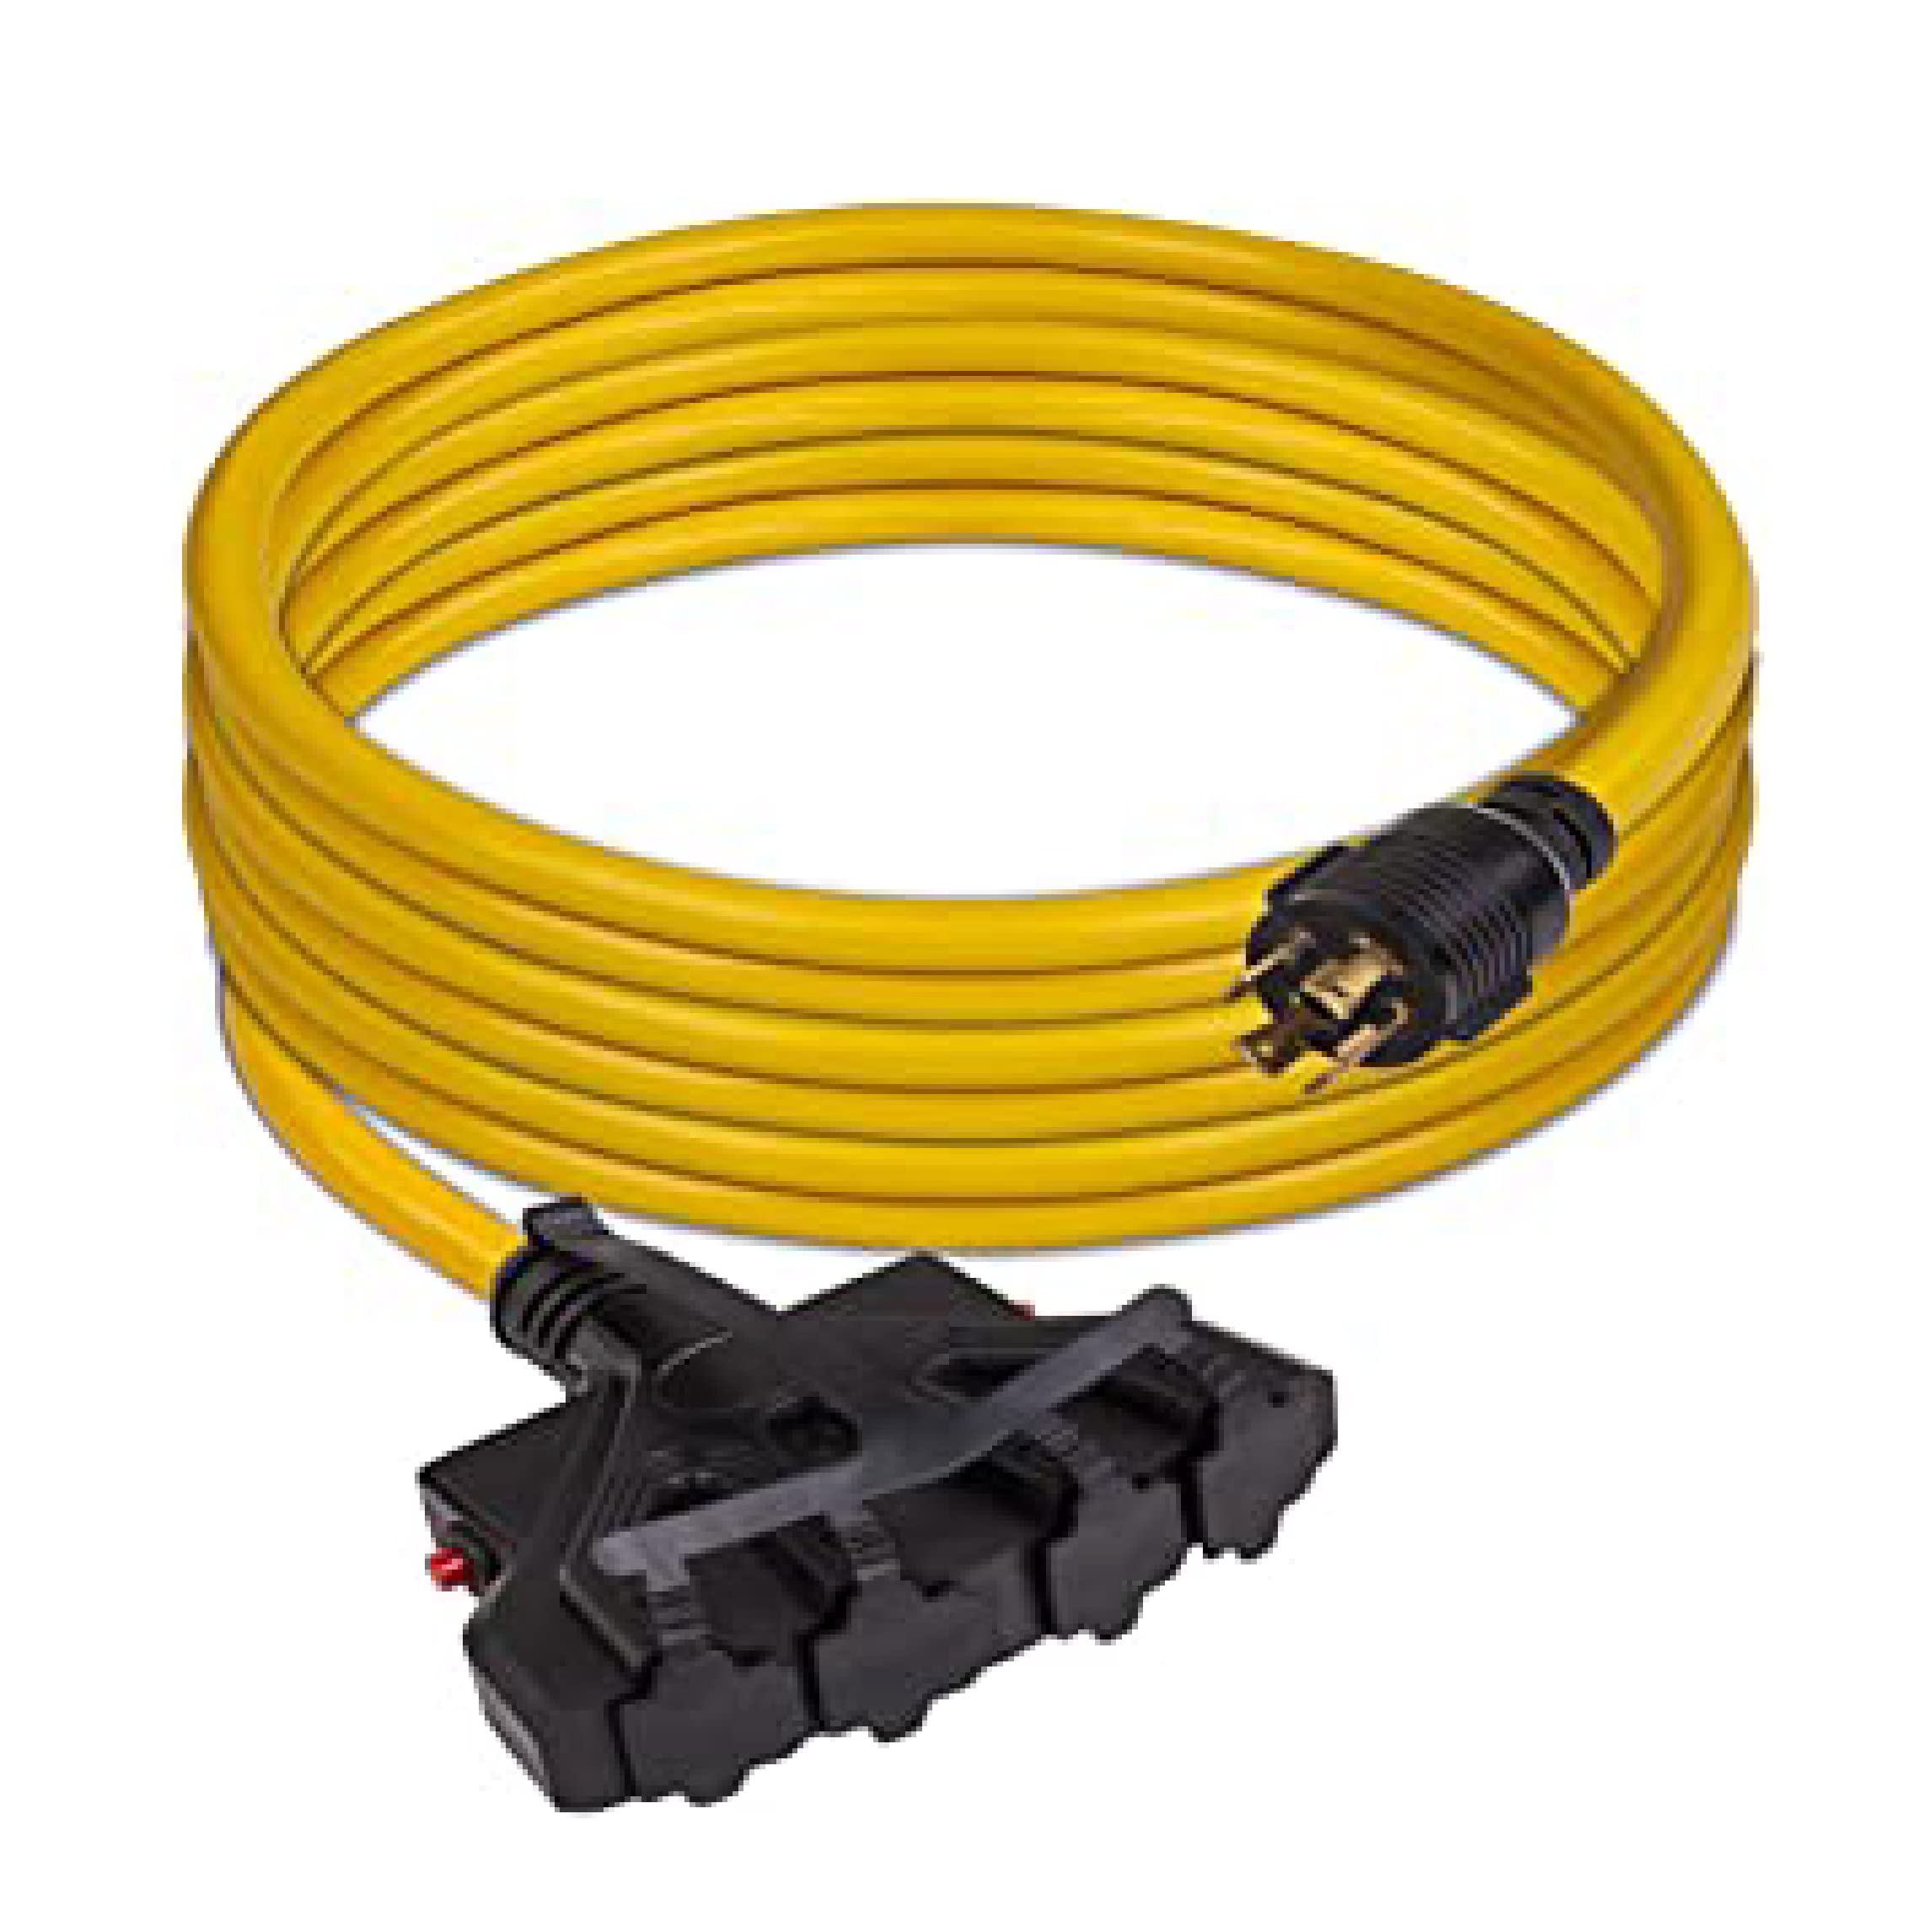 25FT POWER CORD L1430P TO 520RX4 10 GUAGE 30AMP WIRING CIRCUIT BREAKERS & STORAGE STRAP